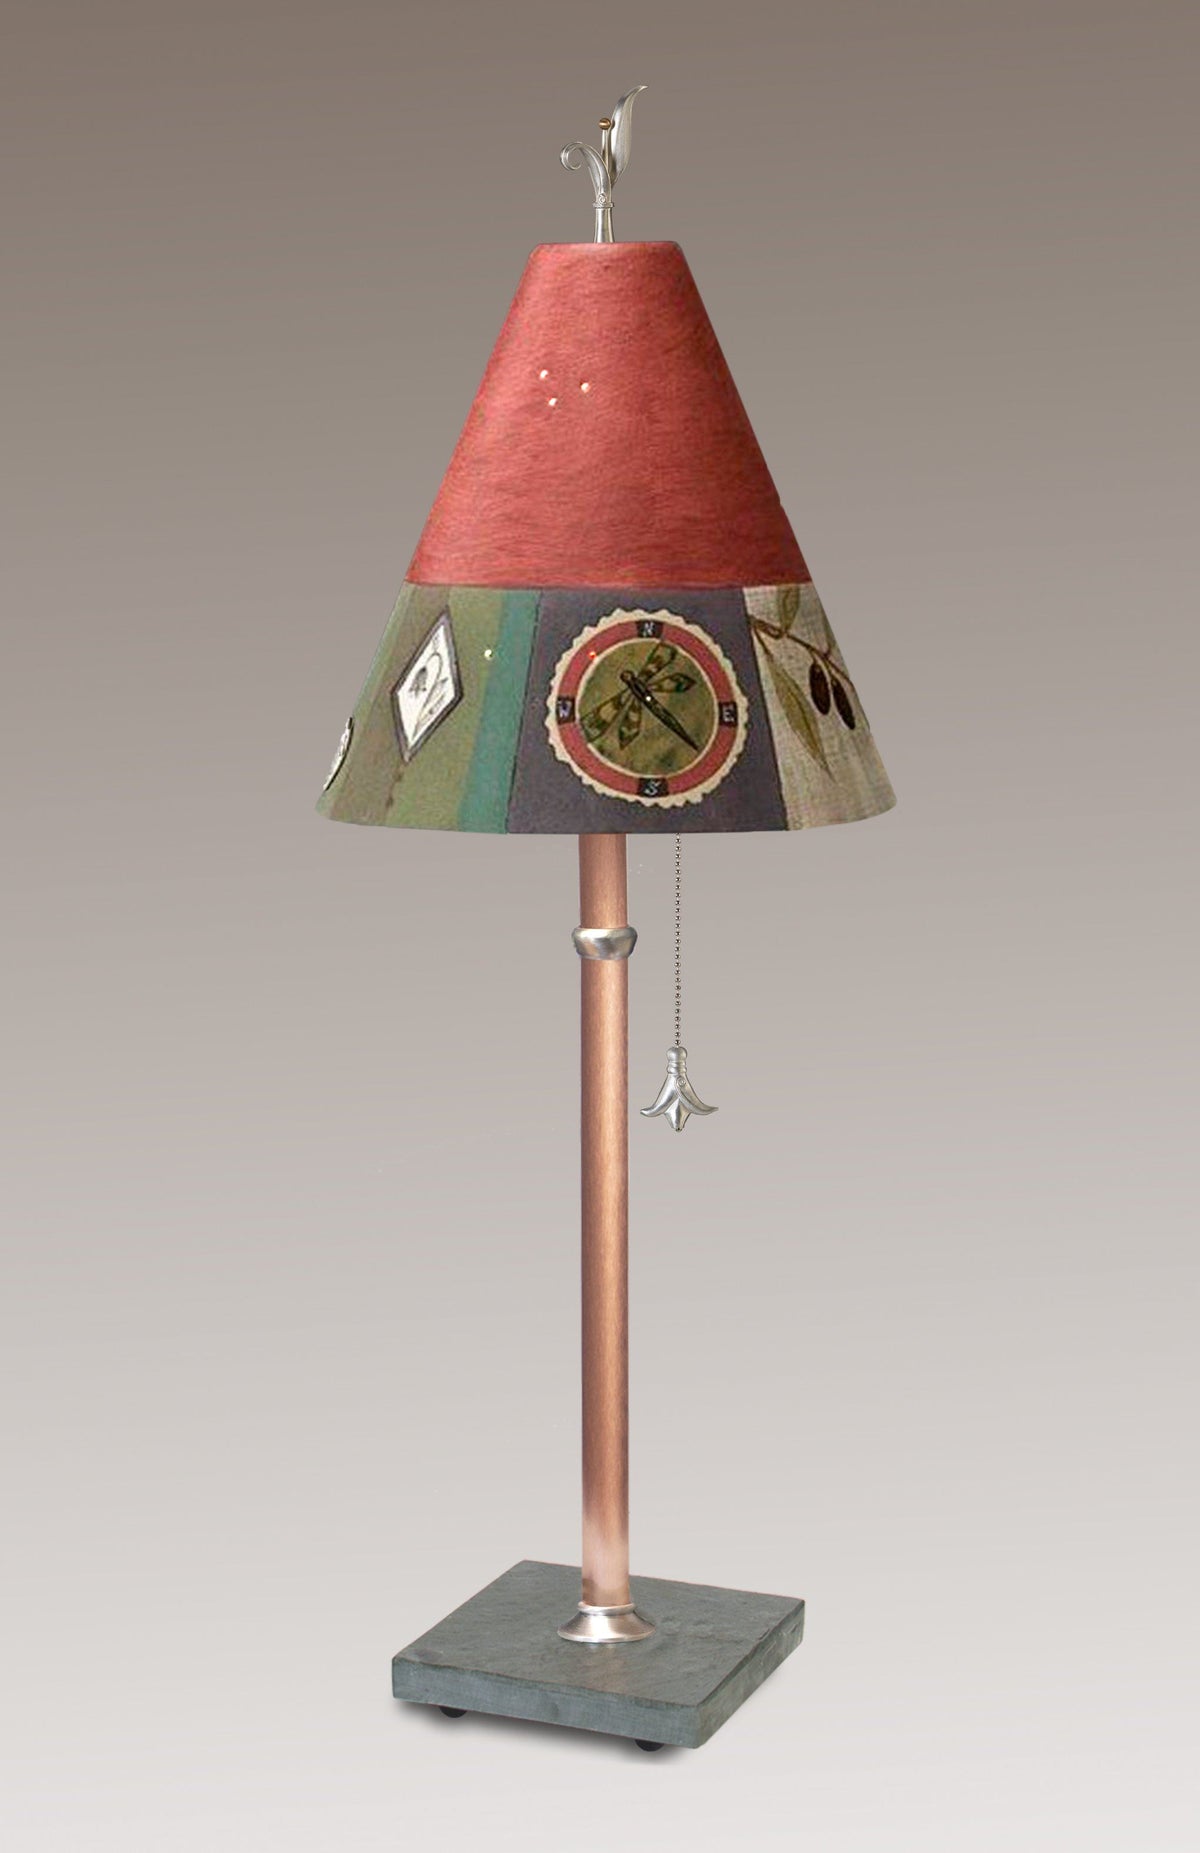 Copper Table Lamp with Small Conical Ceramic Shade in Lockets Rose